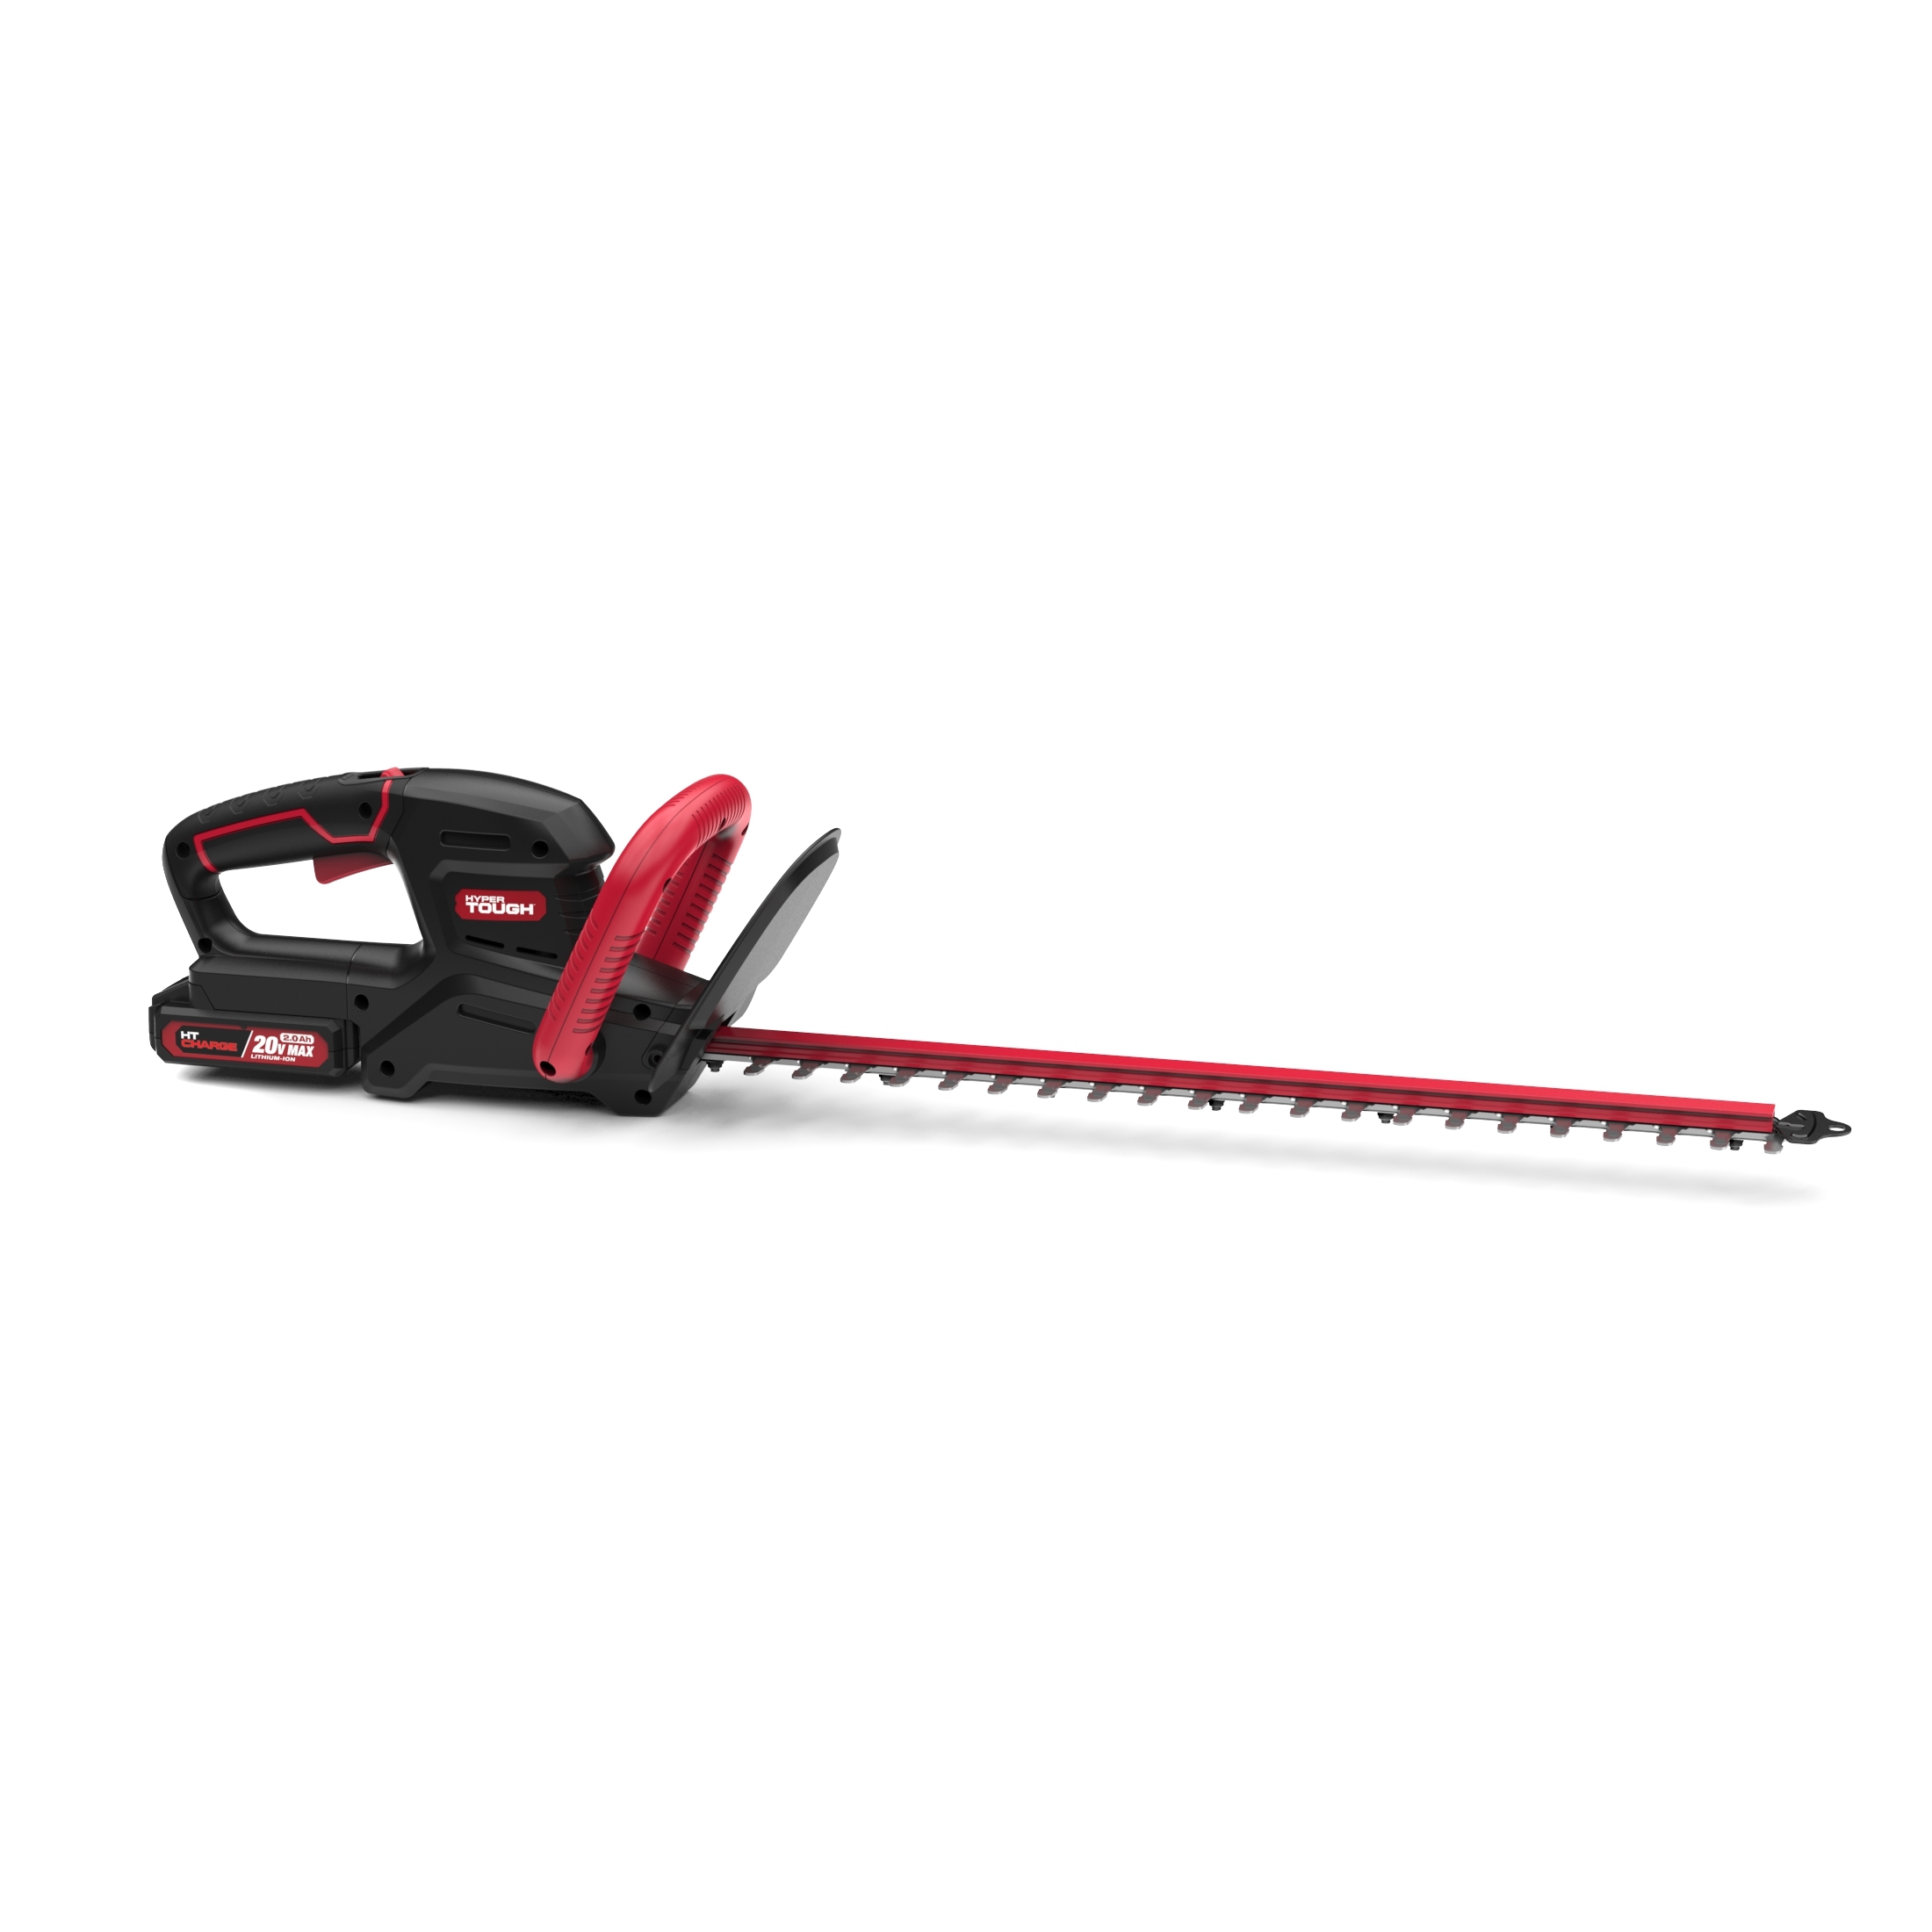 Hyper Tough HT21-401-003-07 20V Max Cordless Battery Powered Hedge Trimmer - 22 in